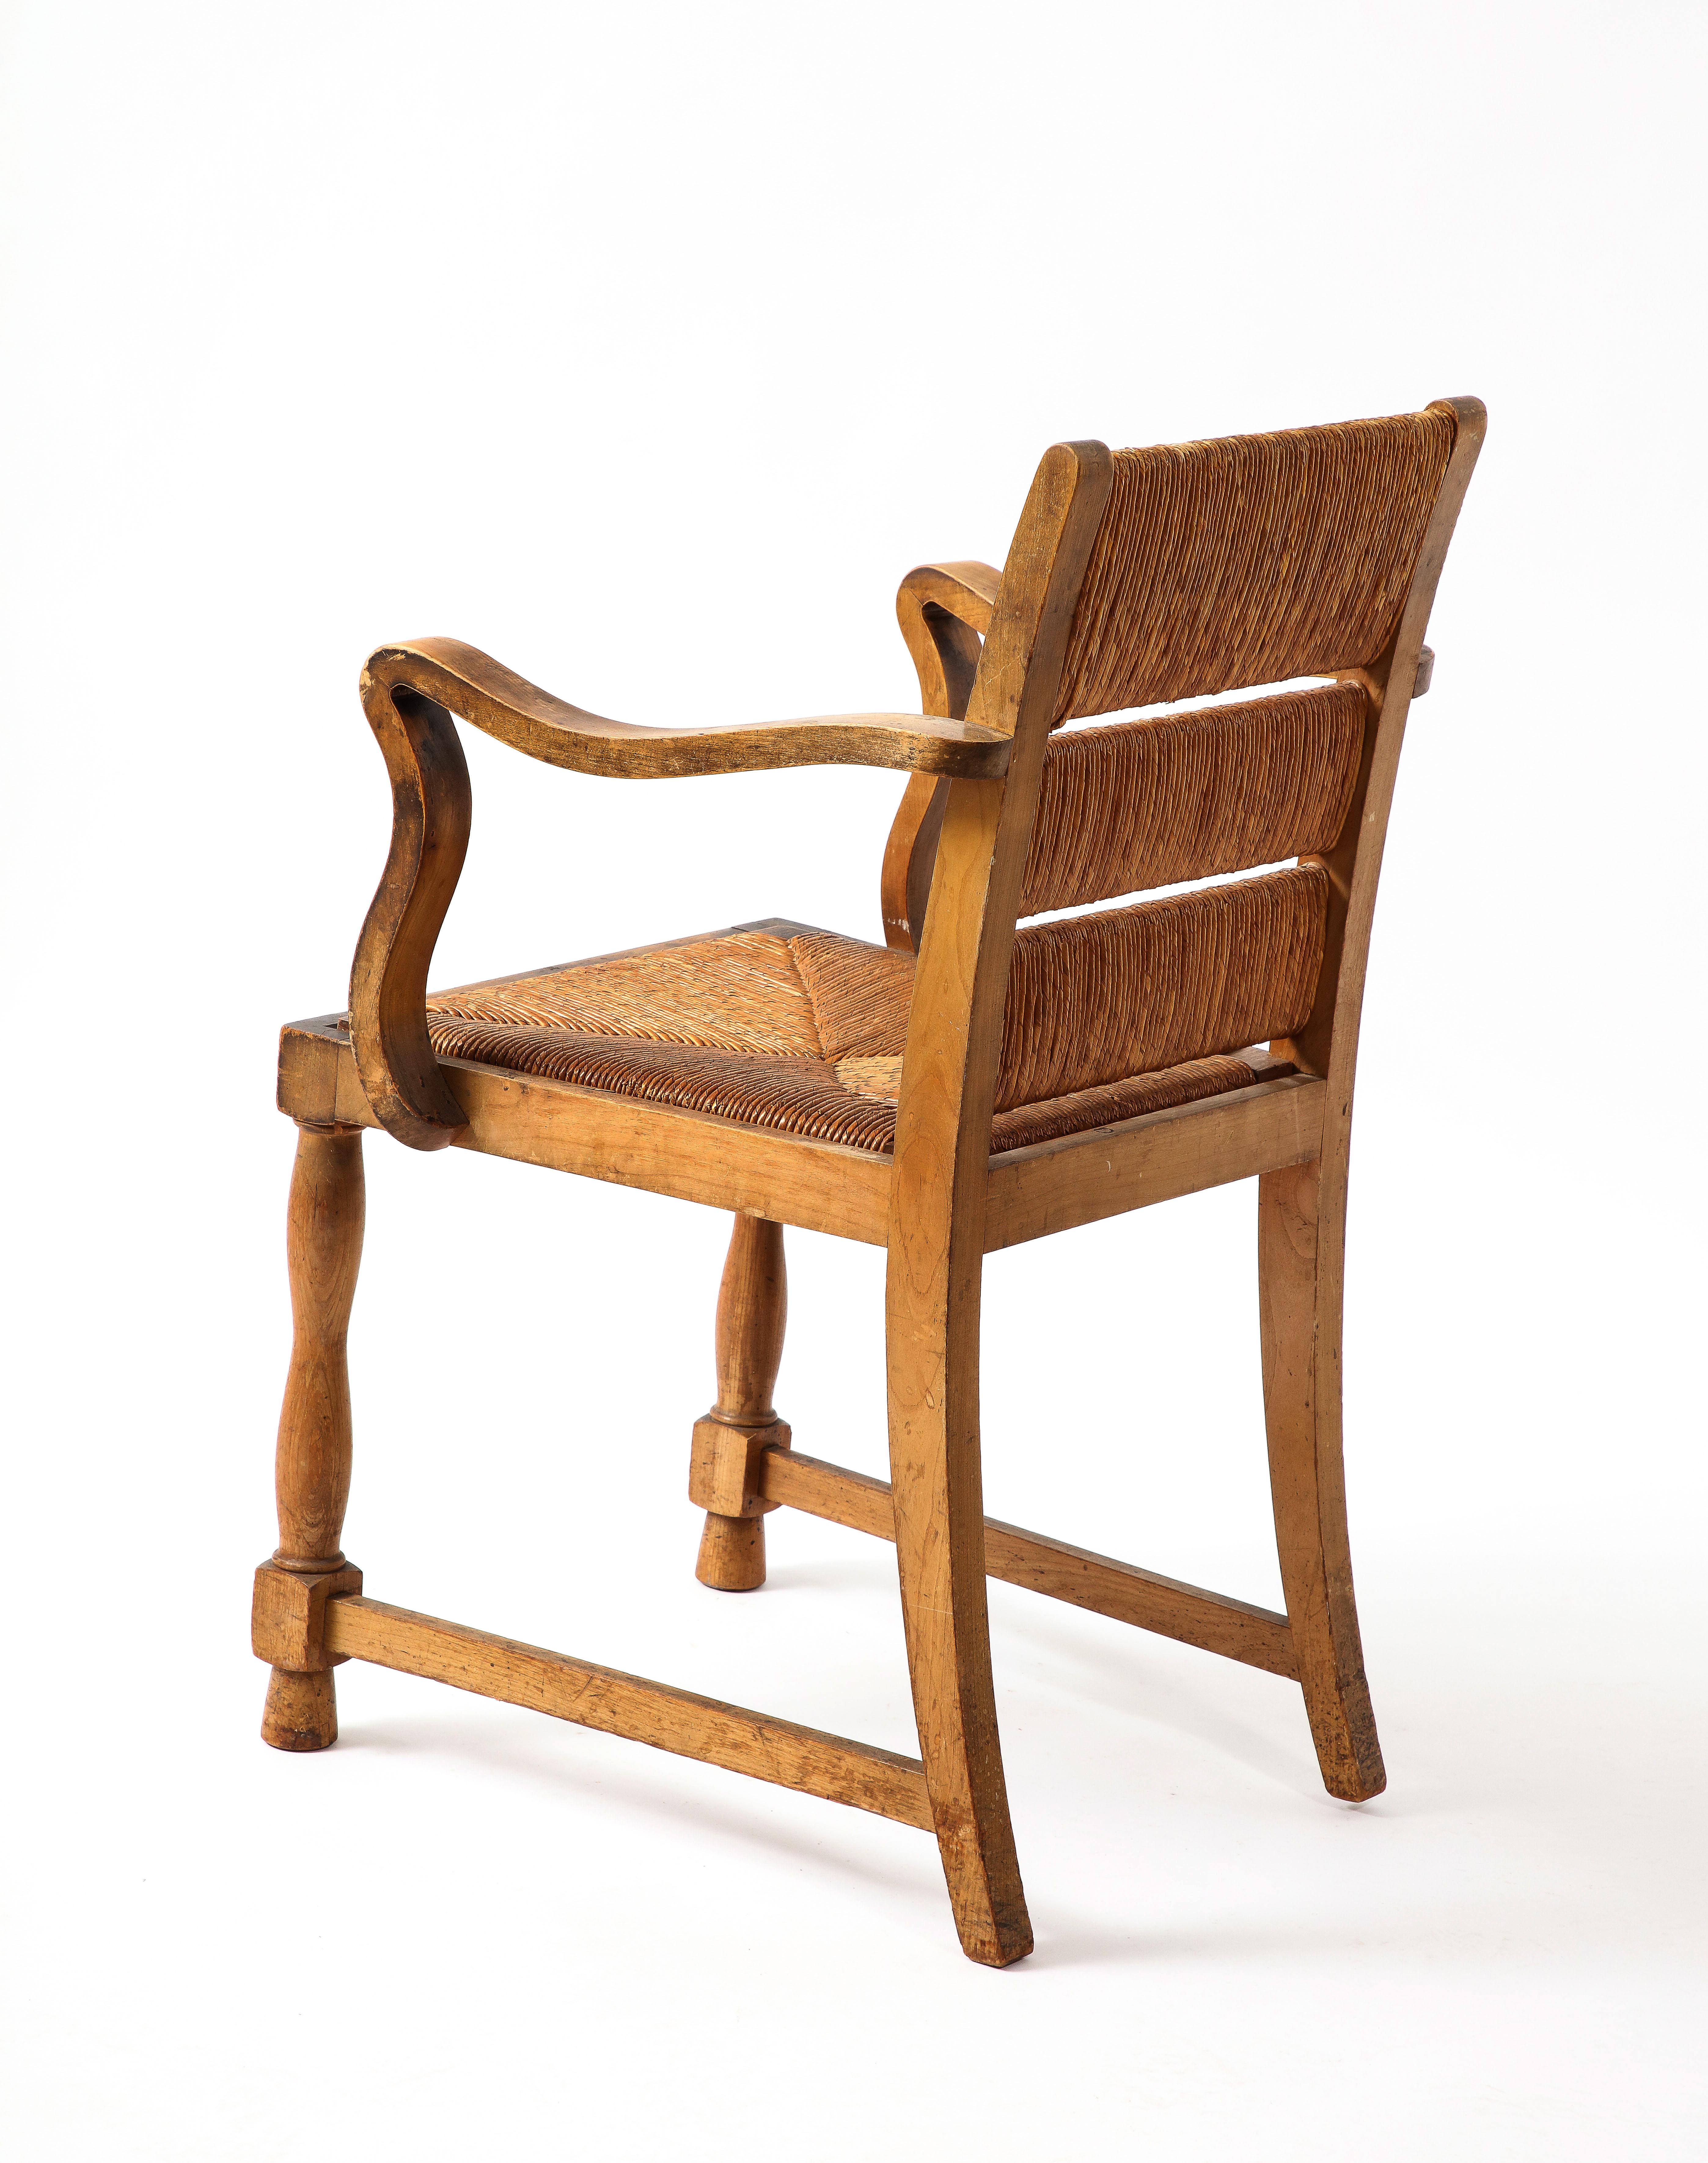 Rustic Four Elm & Rush Chairs by Courtray, France 1940s